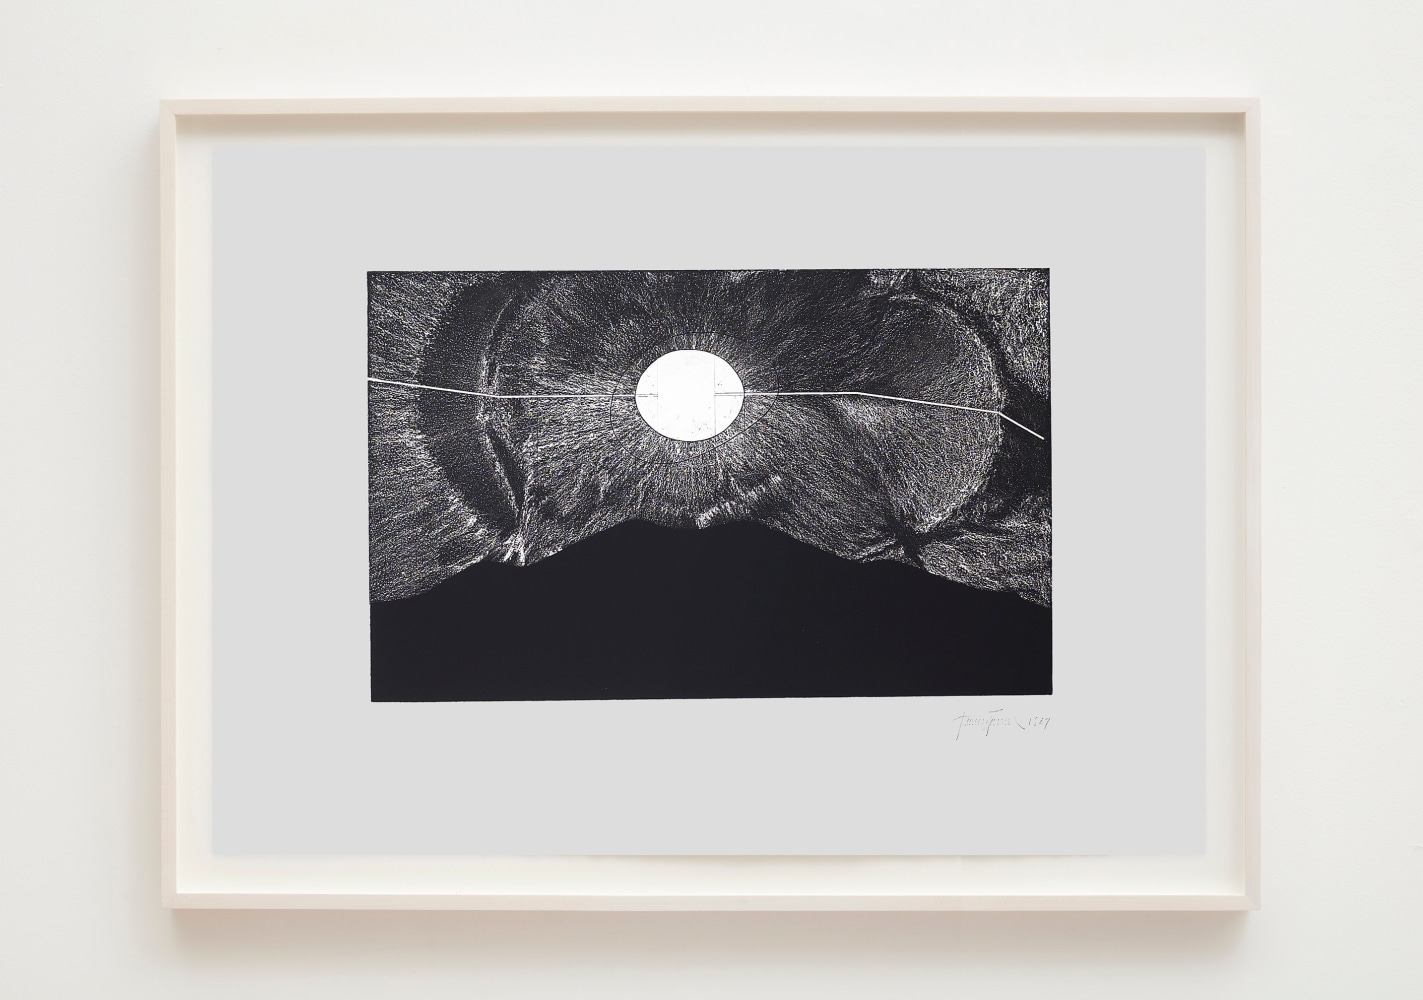 James Turrell&amp;nbsp;
Mapping Spaces: Fumarole, 1987-8&amp;nbsp;
Aquatint, photoetching, etching, soft-ground etching, and drypoint on Hahnemuhle paper
22 x 30 3/4 inches (55.9 x 78.1 cm)&amp;nbsp;
Edition of 35 + proofs&amp;nbsp;
Printed by Peter Kneub&amp;uuml;hler, Zurich&amp;nbsp;
Published by Peter Blum Edition, New York&amp;nbsp;